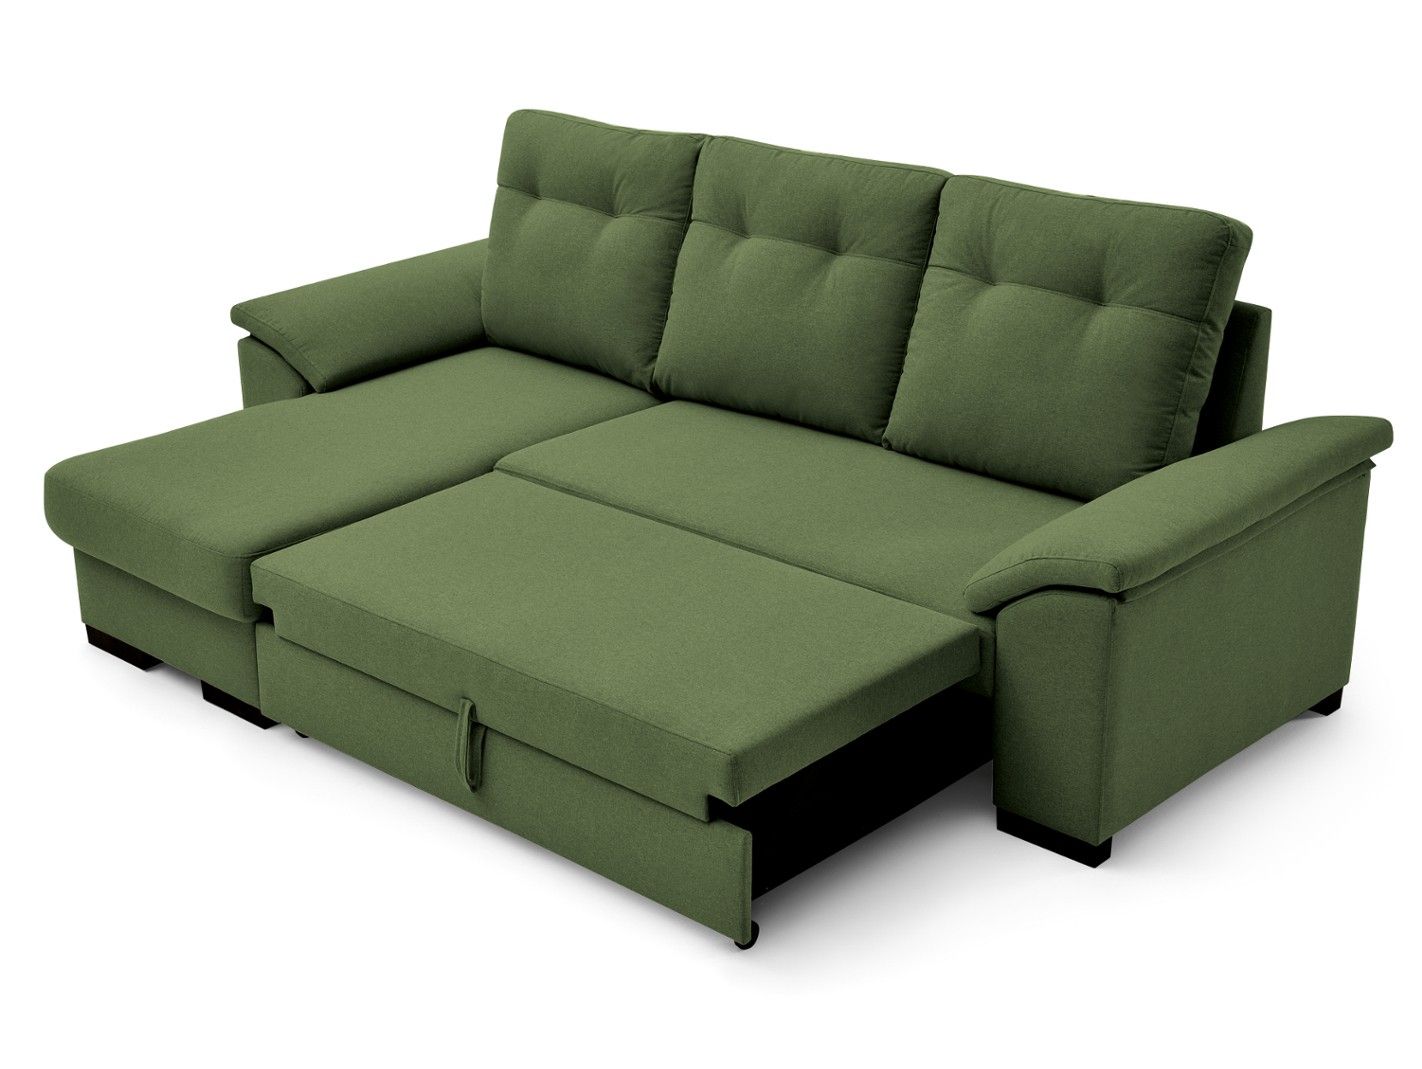 sofa bed with chaise longue